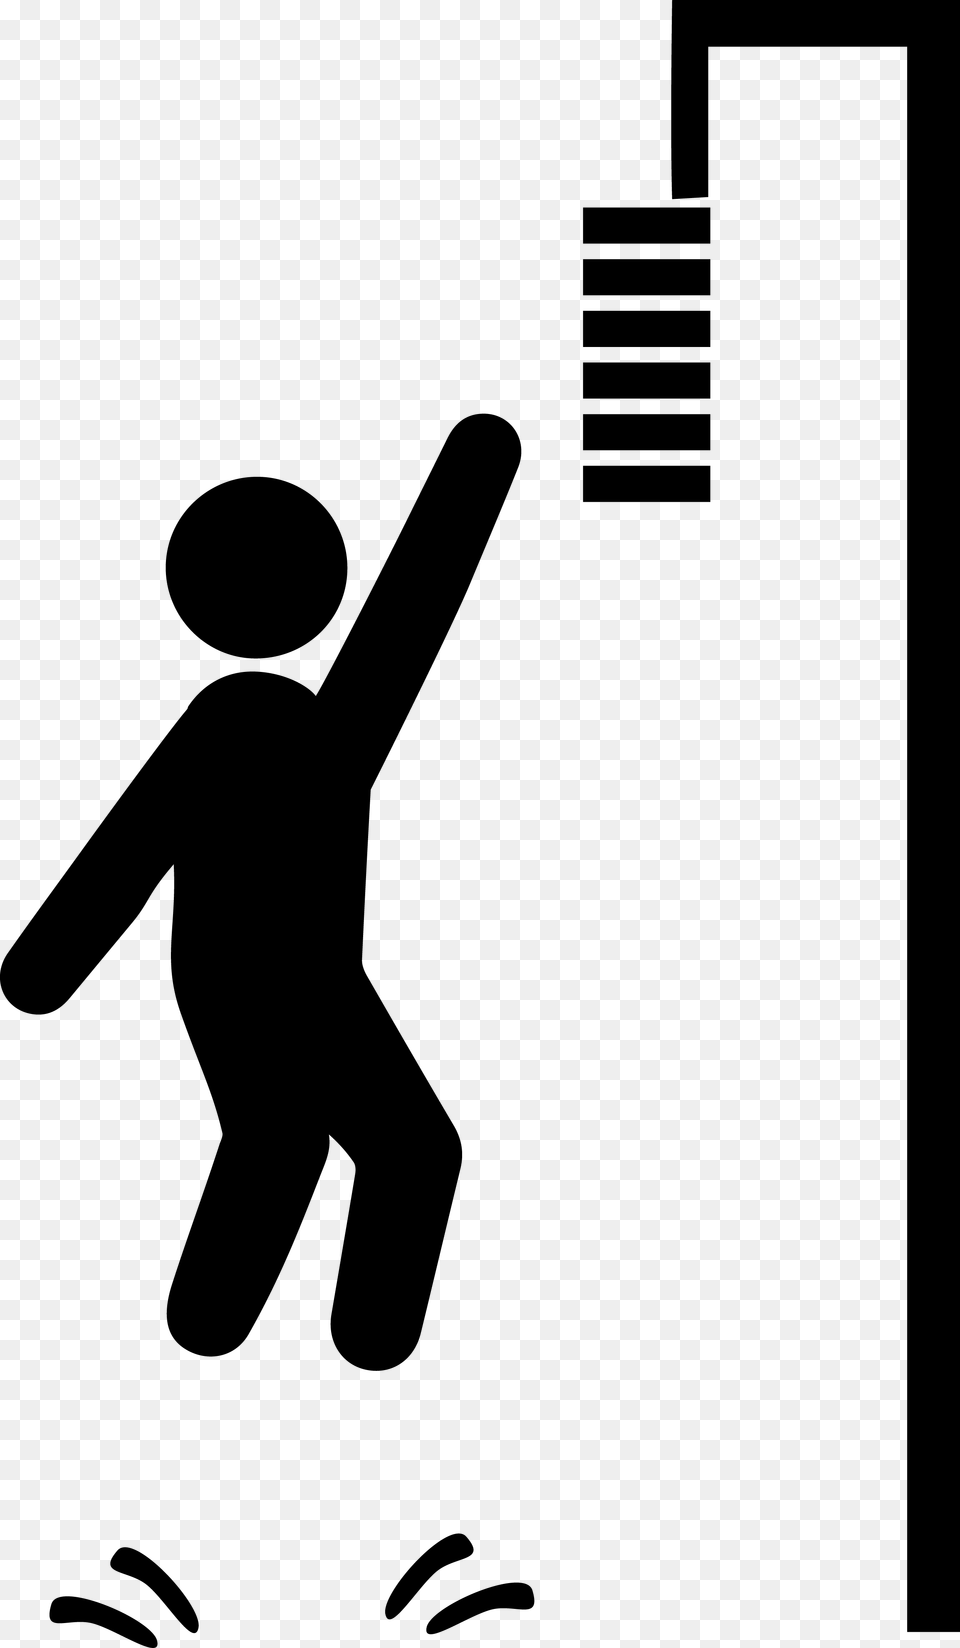 Vertical Jump Clip Art, Stencil, Silhouette, Sign, Symbol Png Image